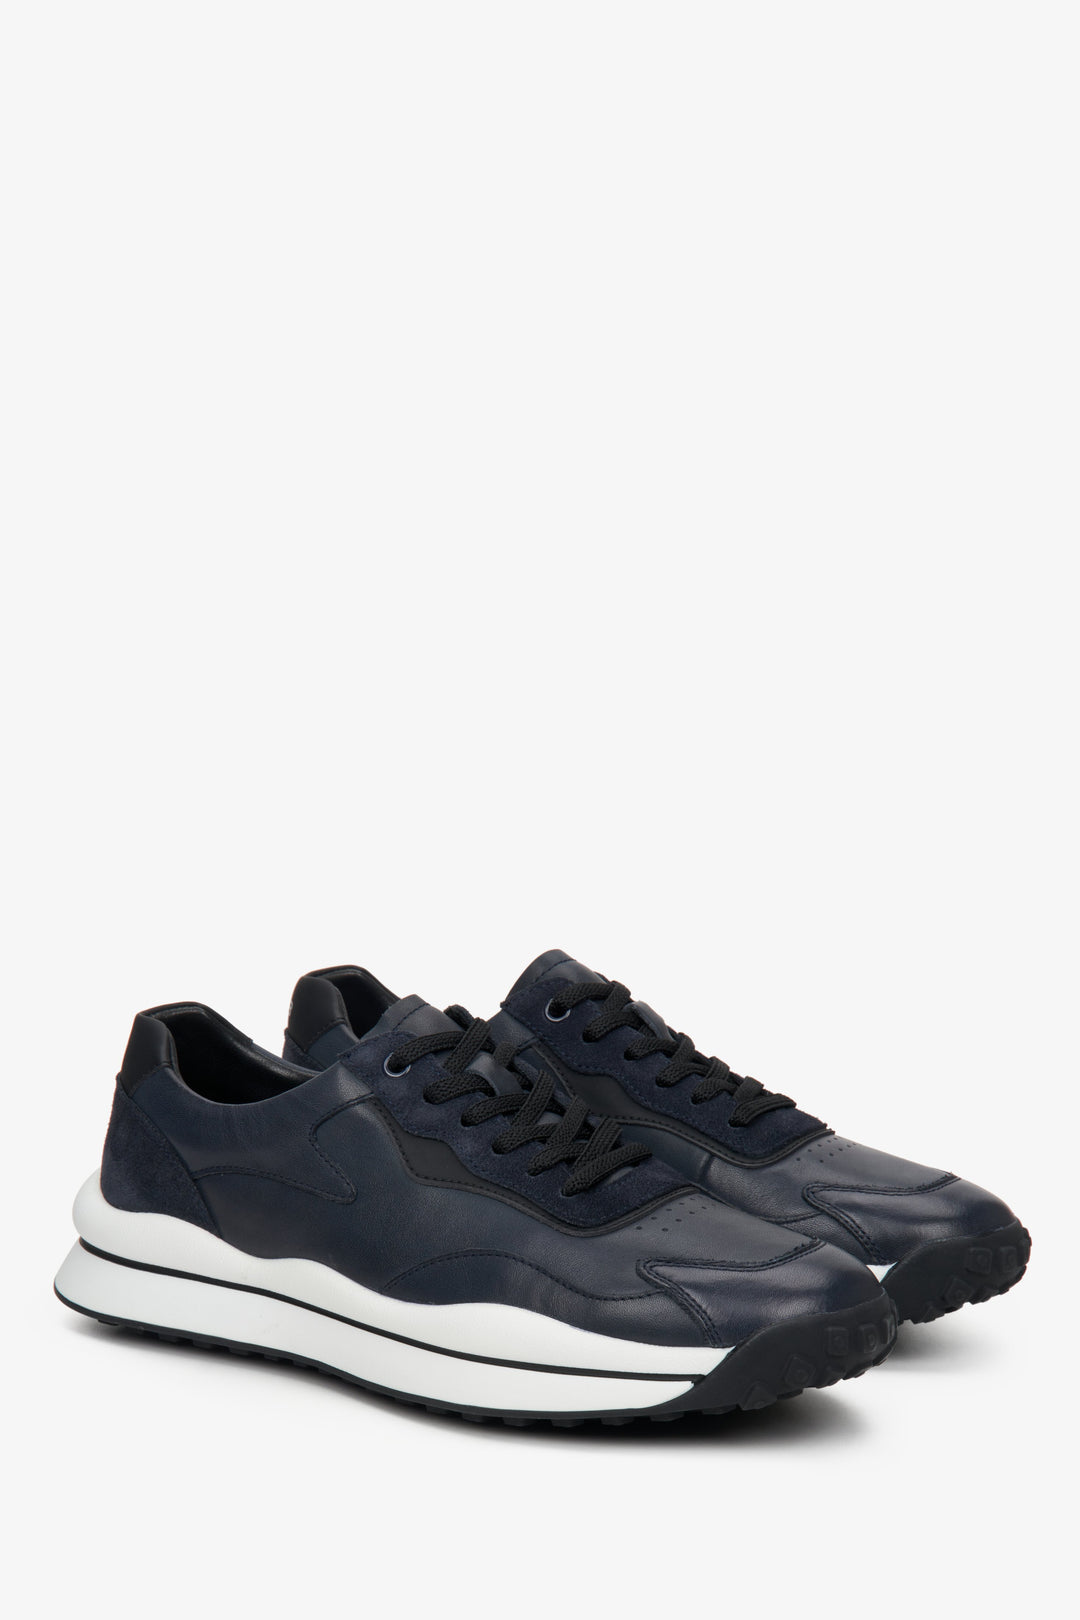 ES 8 men's spring and autumn sneakers in navy blue-black-white.